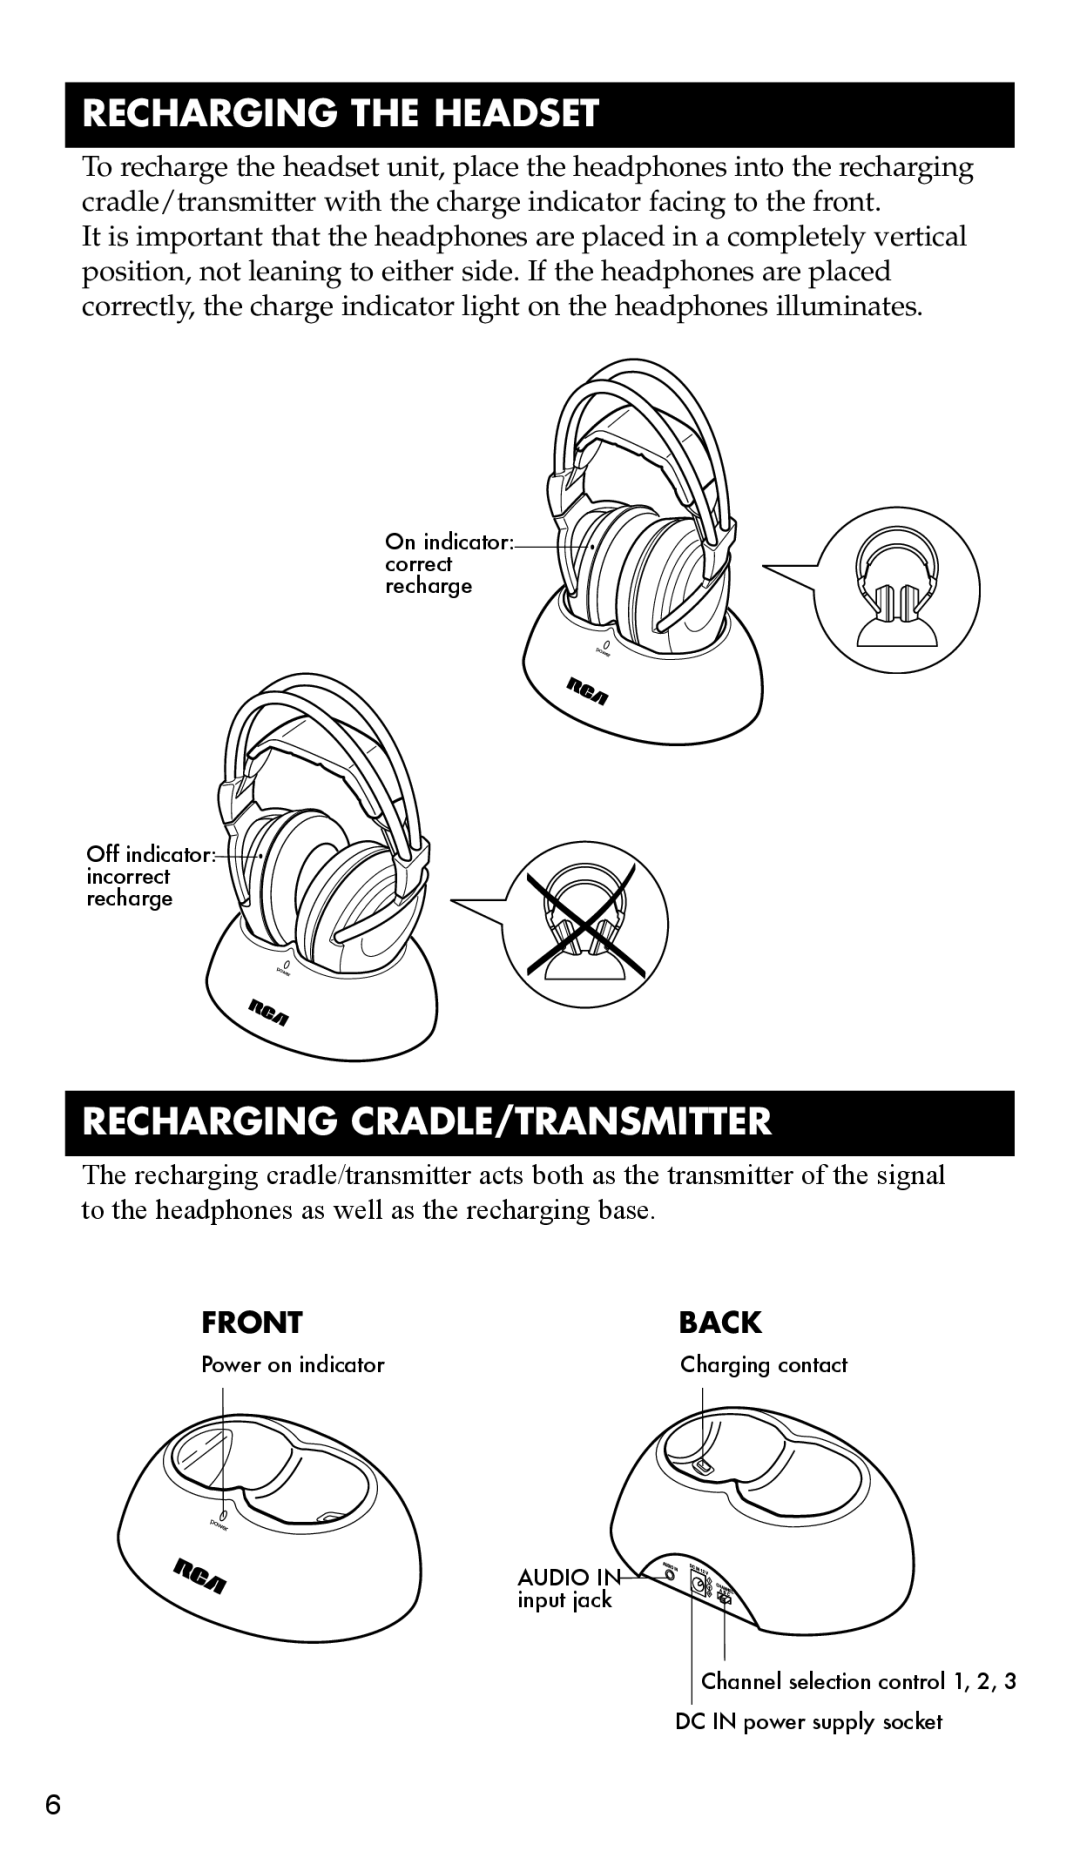 RCA WHP175, WHP170 manual Recharging The Headset, Recharging Cradle/Transmitter, Front, Back 